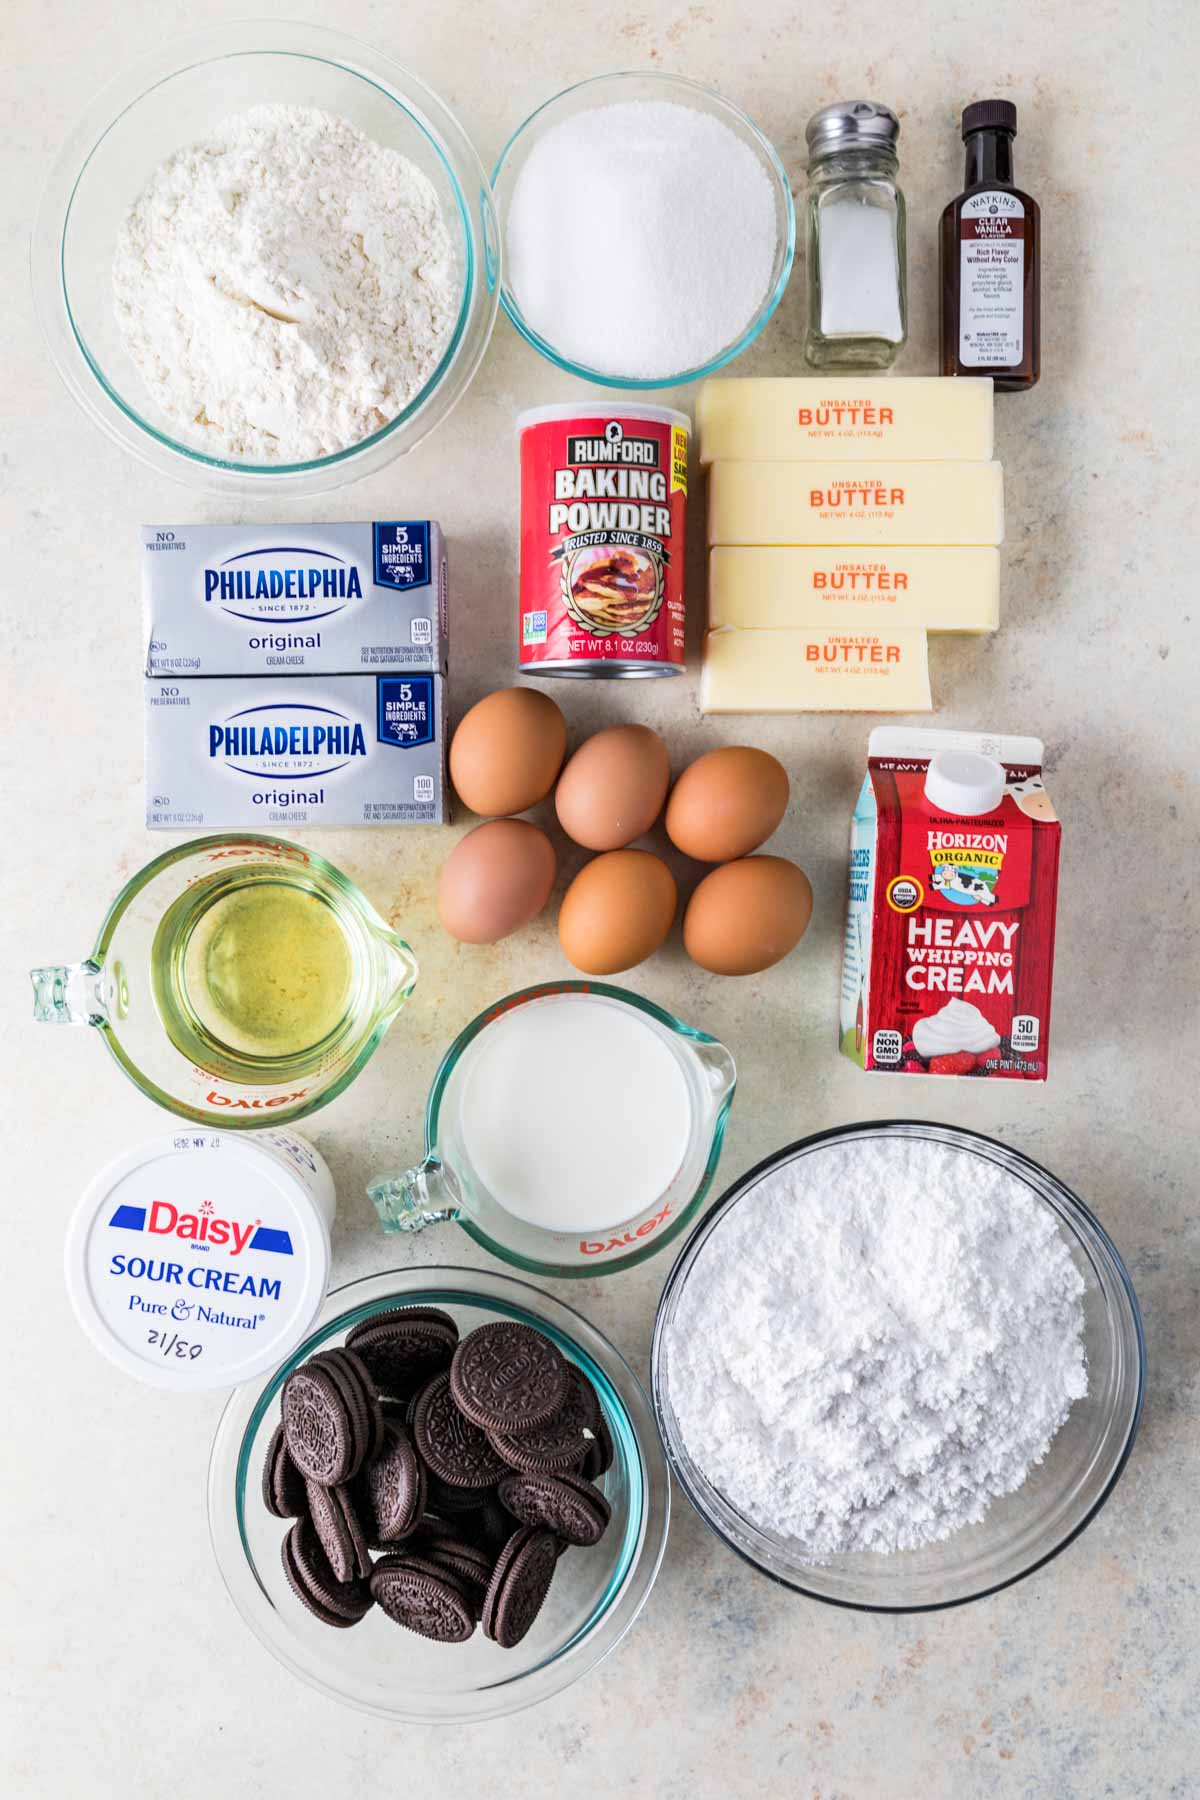 Overhead view of ingredients including flour, eggs, sour cream, oreos, and more.